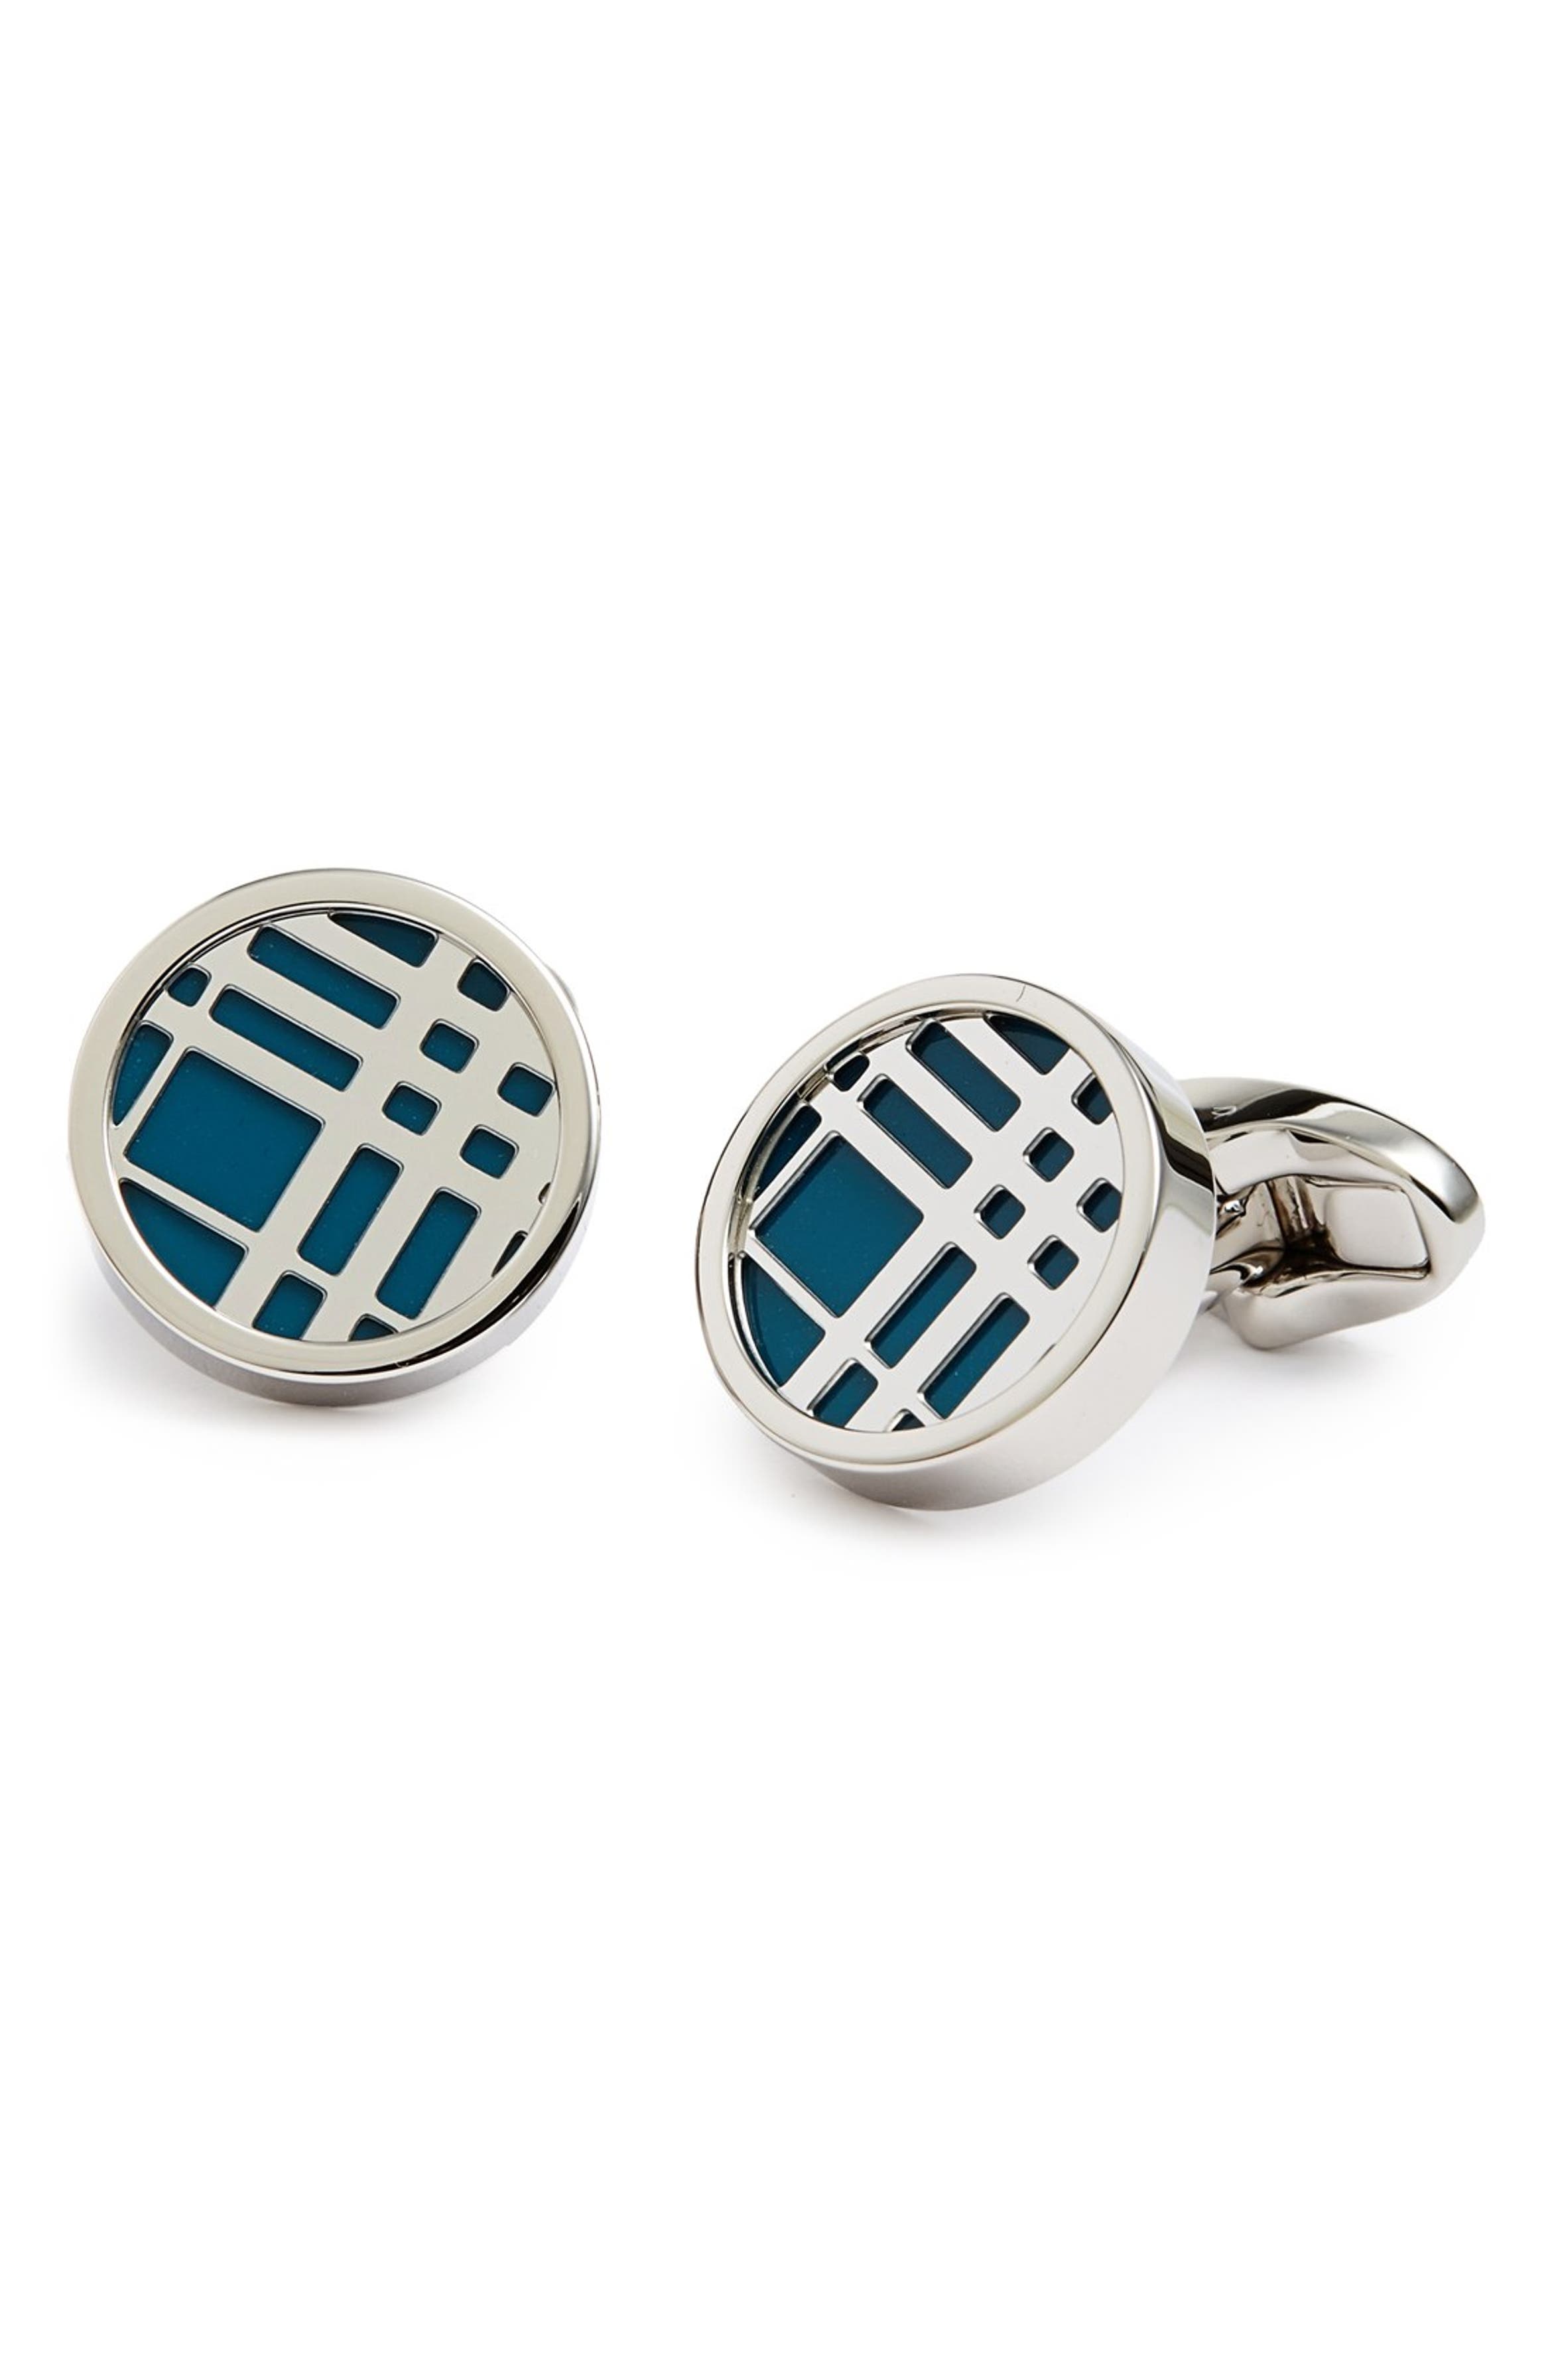 Burberry Check Cuff Links | Nordstrom